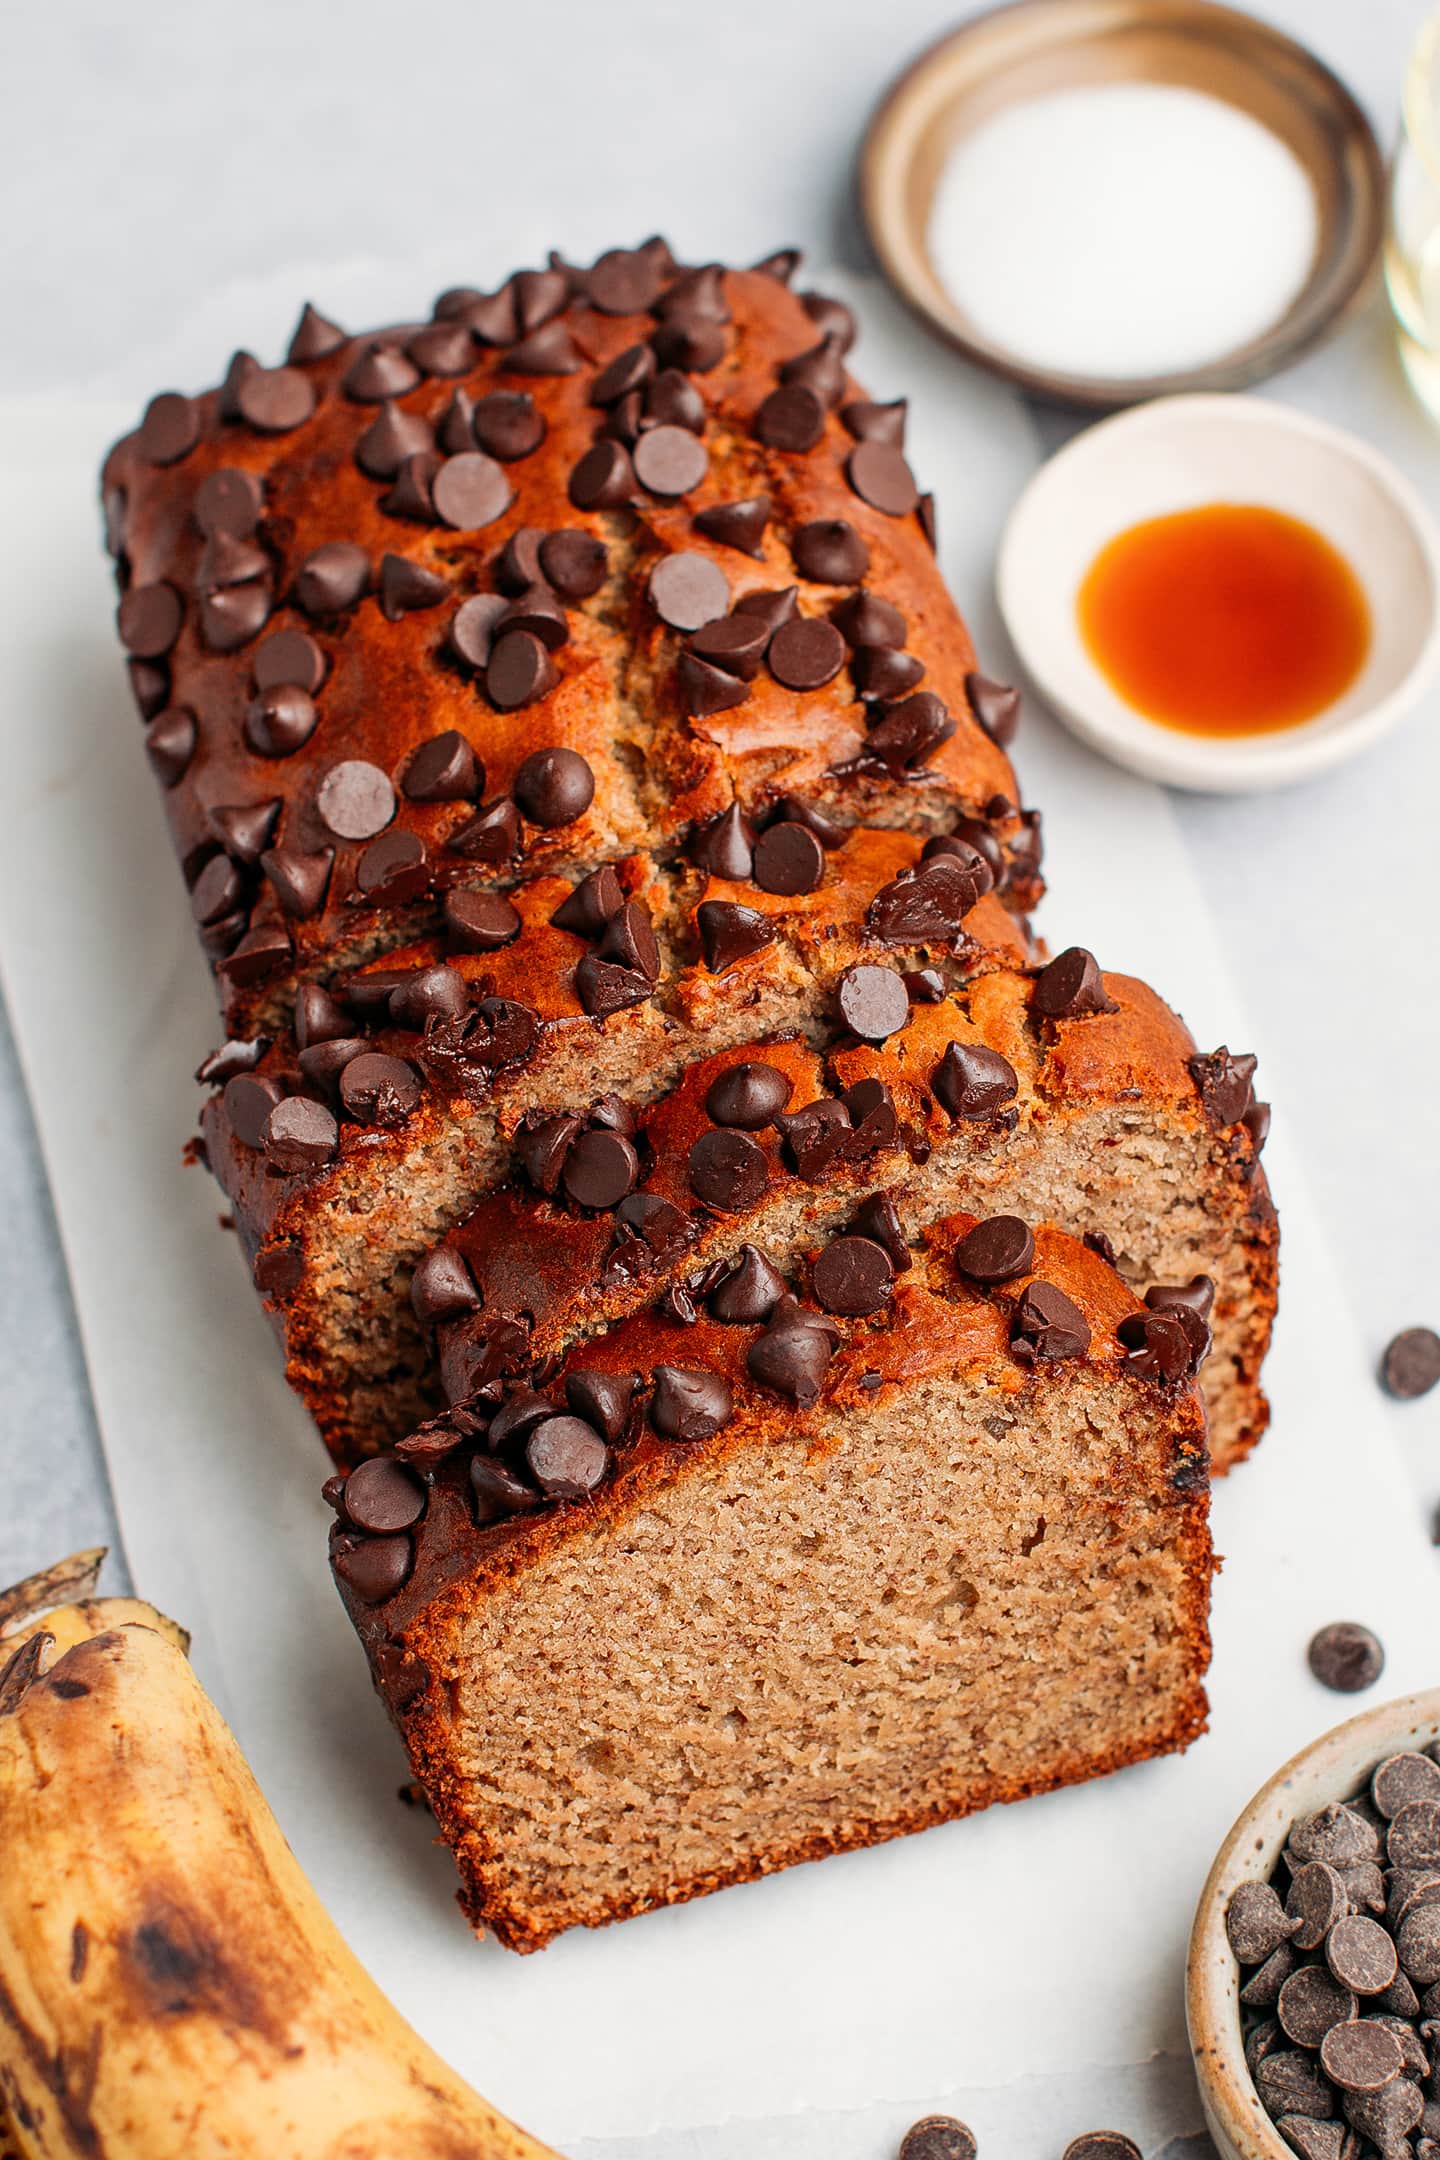 Sliced banana bread topped with chocolate chips.